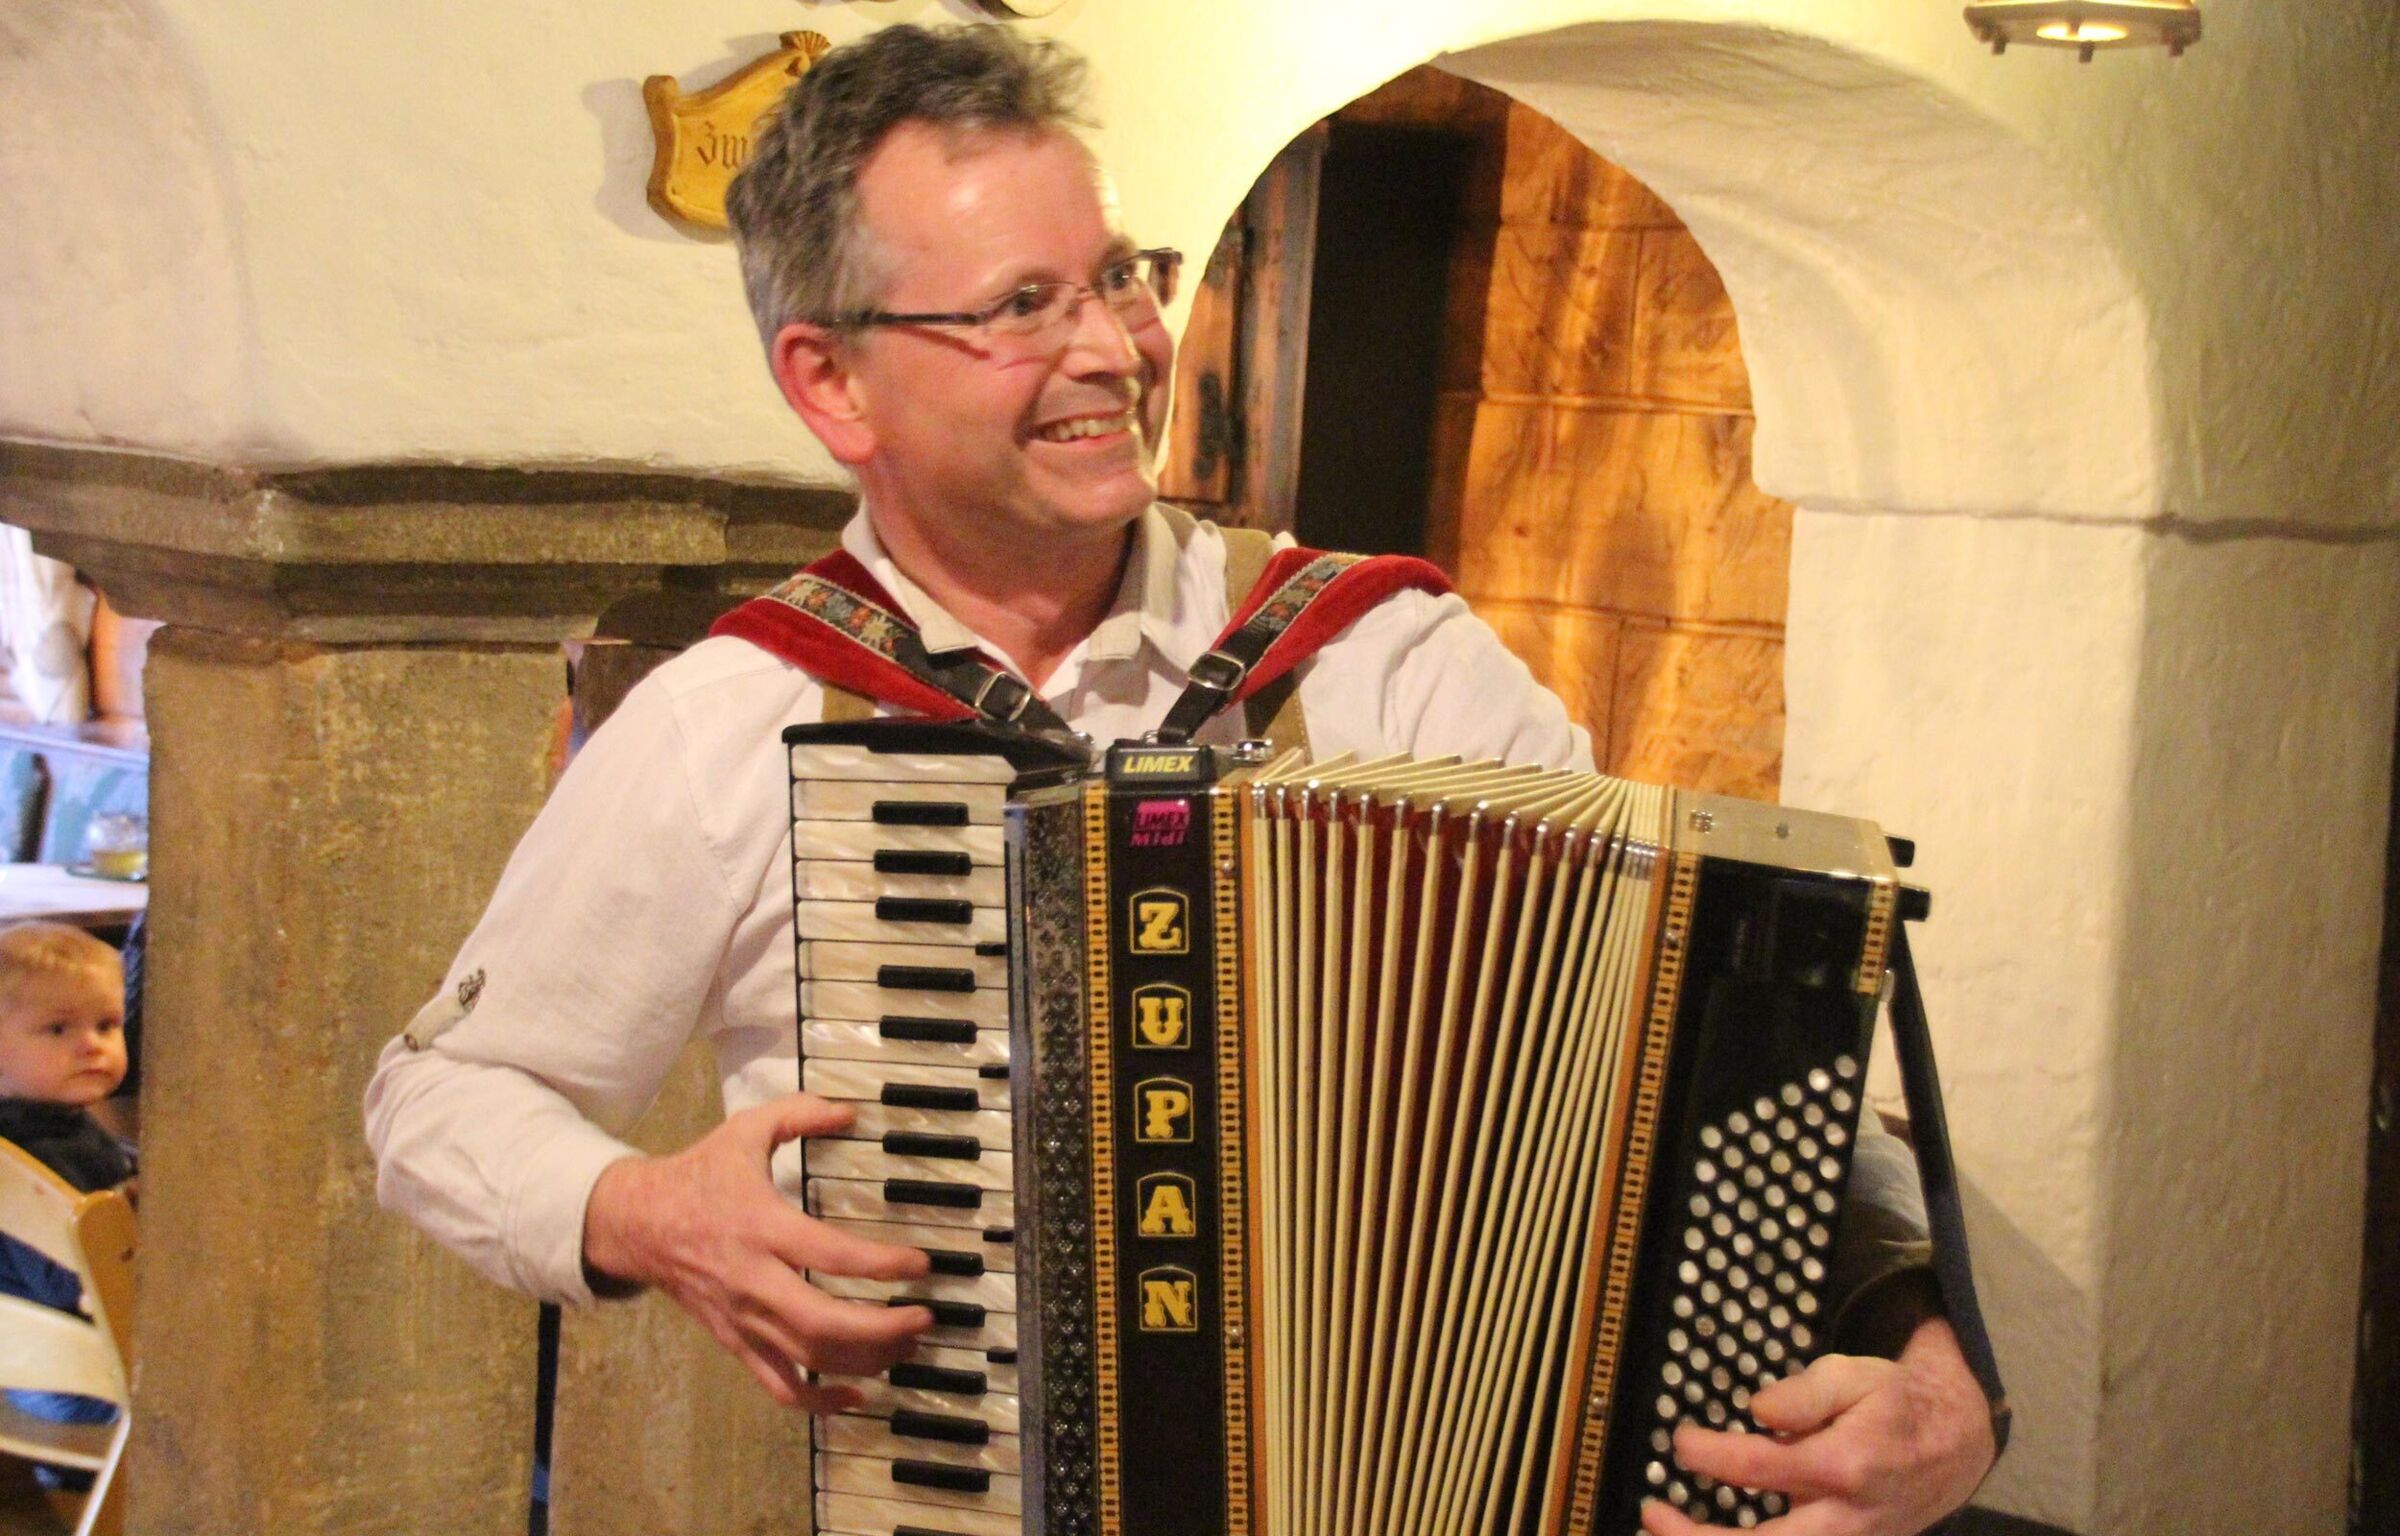 A man in traditional costume playing an accordion